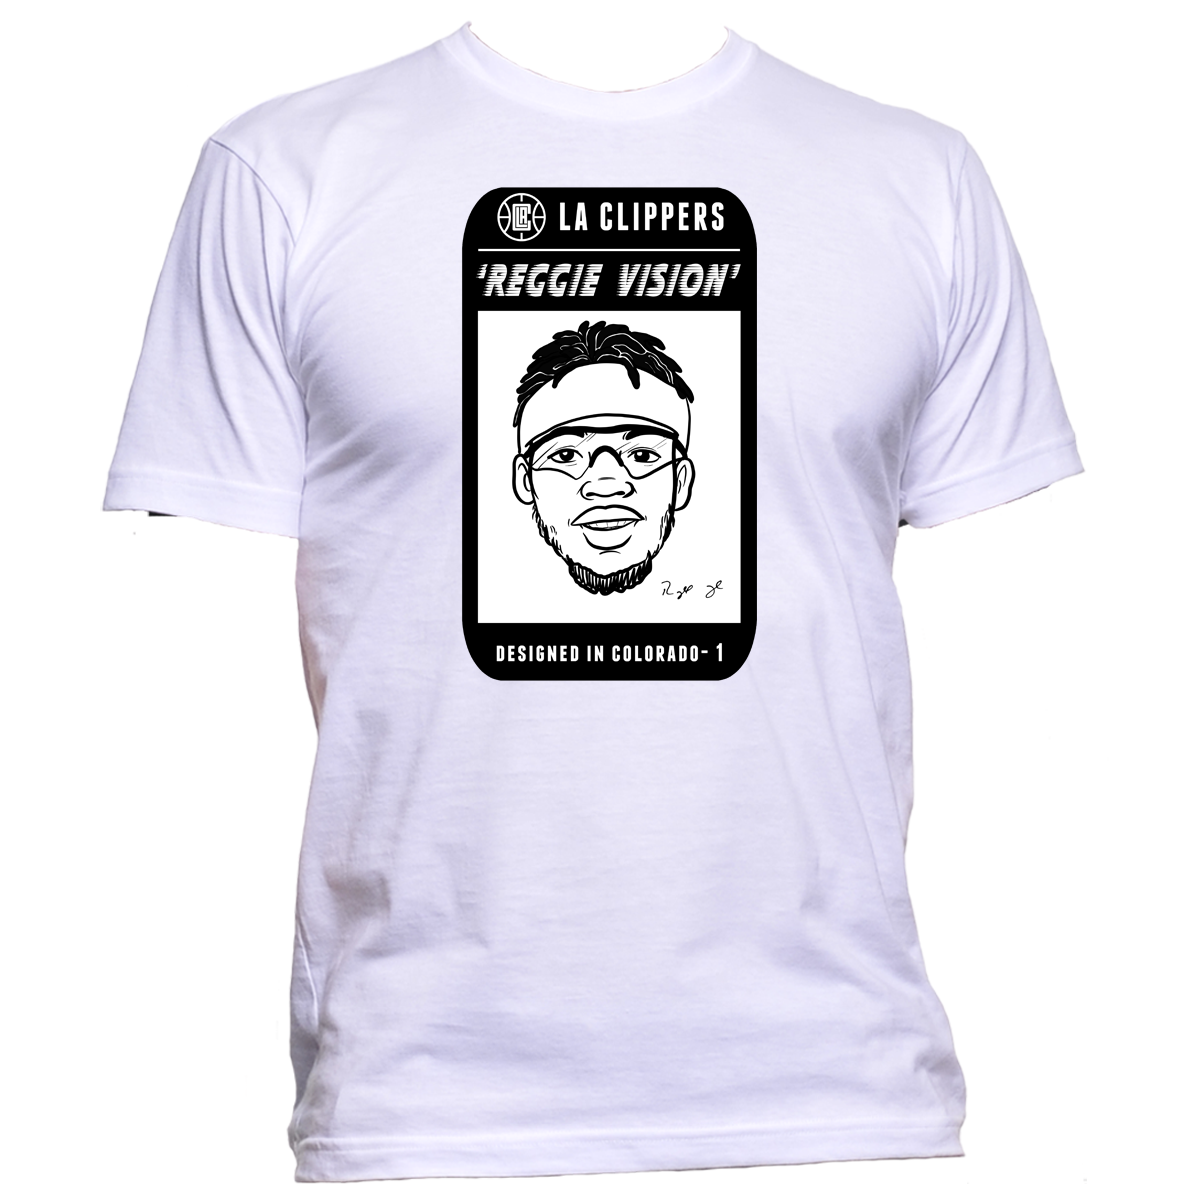 The Reggie Vision Contract Tee